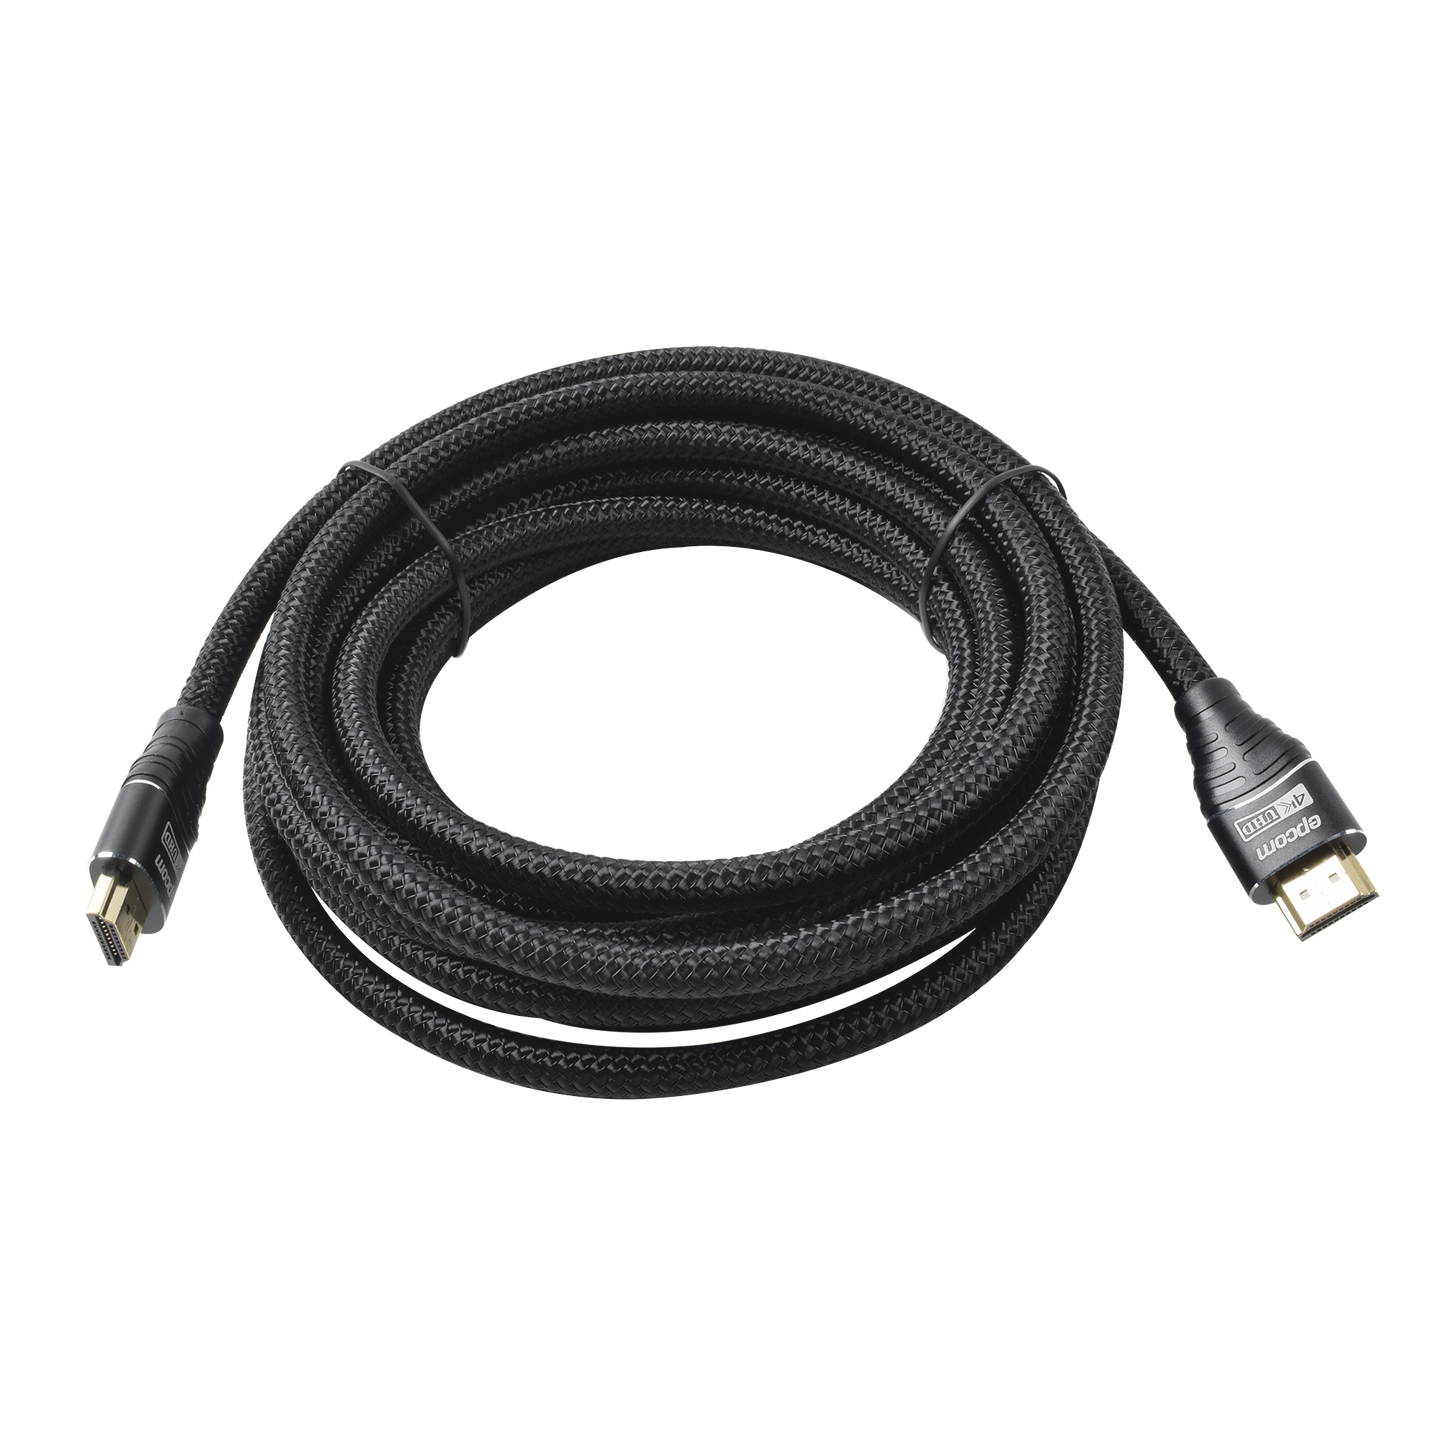 HDMI Cable 2.0 Version, Round 5m ( 16.4 ft ) Optimized for 4K ULTRA HD